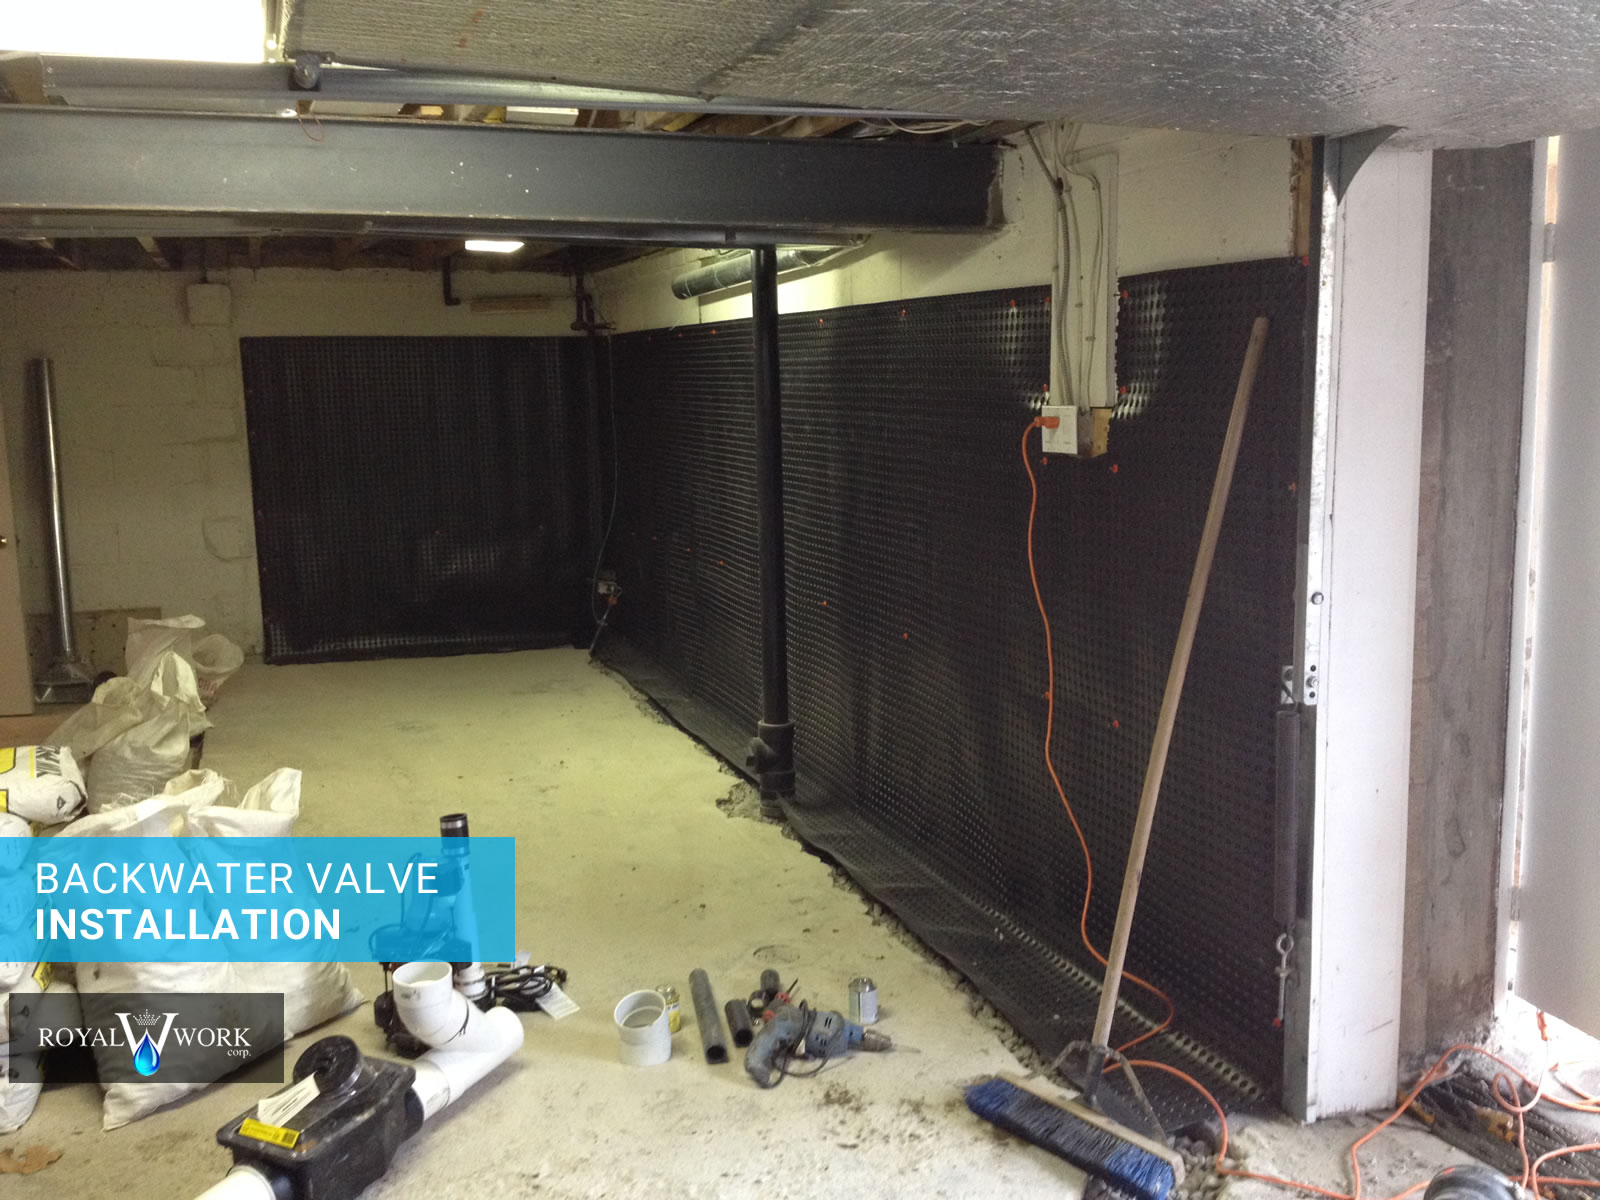 Full basement waterproofing with backwater valve installation